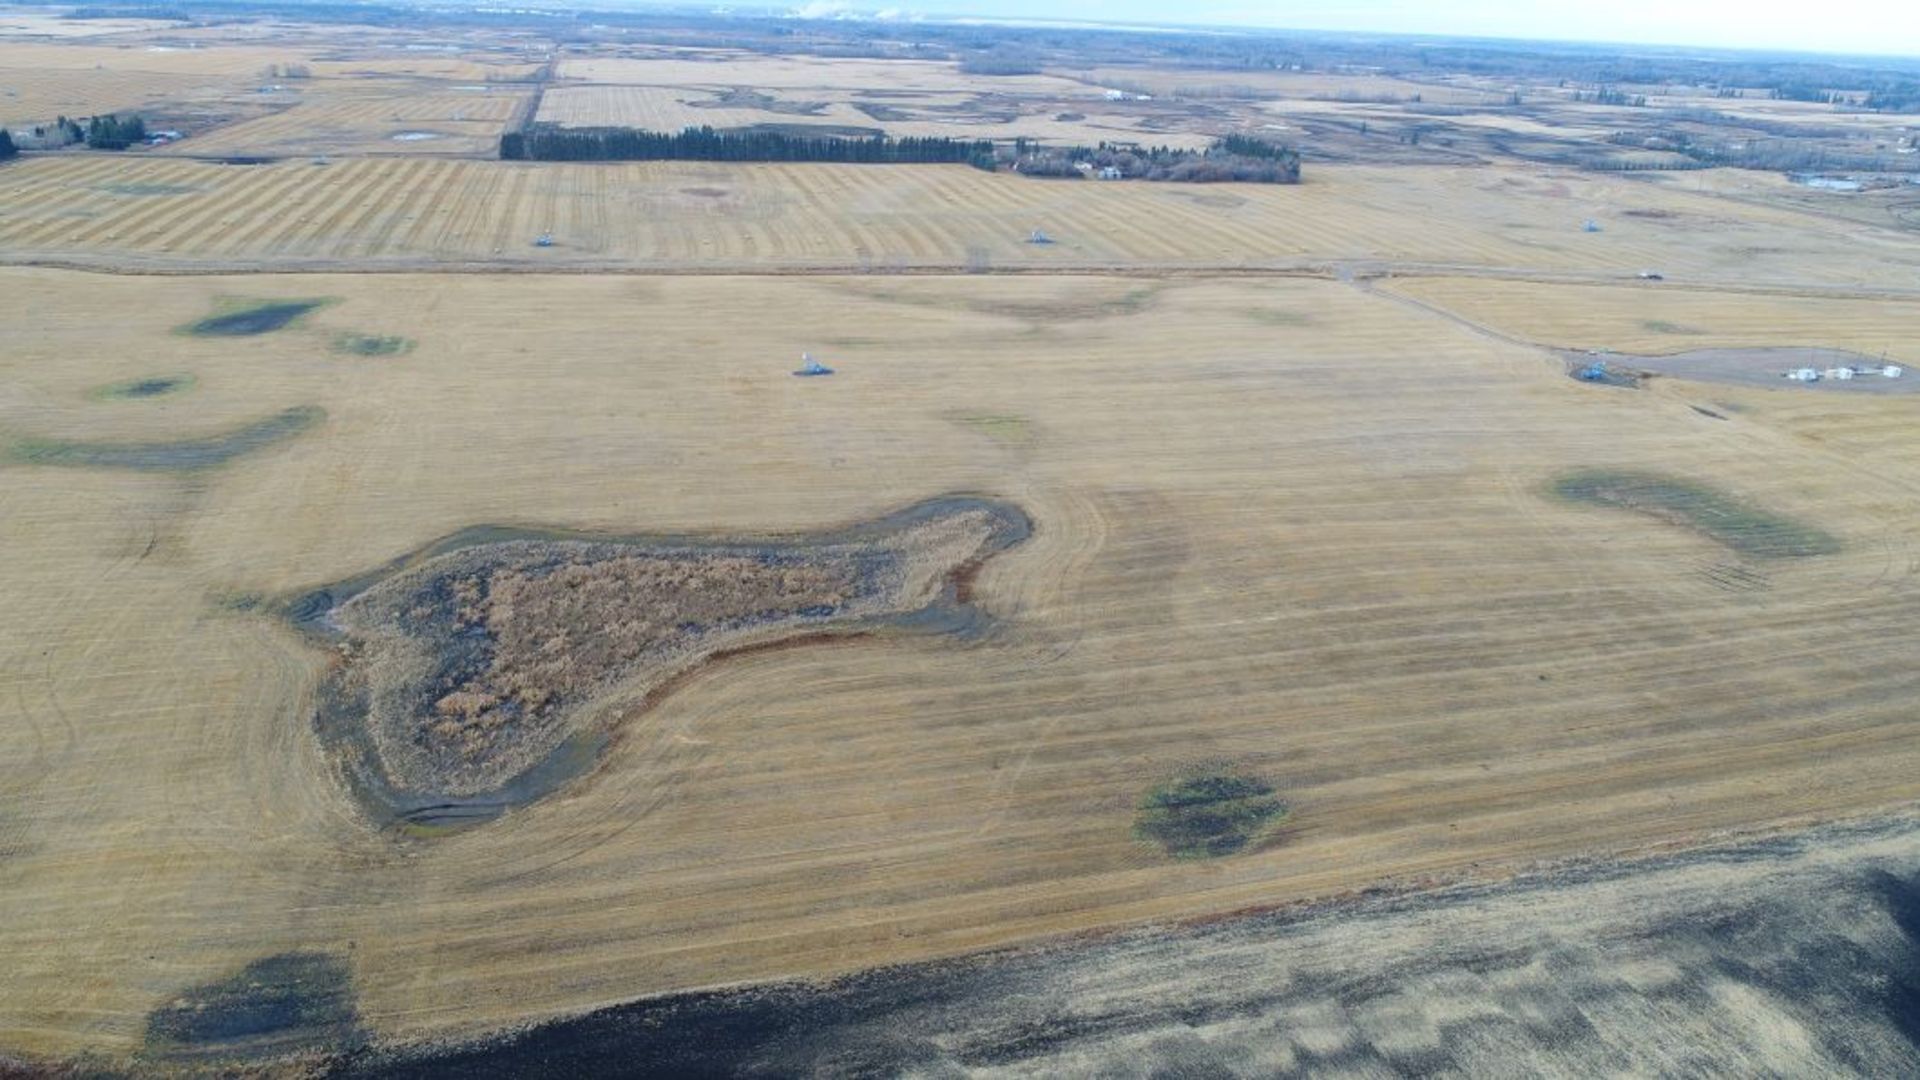 160+/- Total Acres NW 8-56-20-W4, Bruderheim, AB, consisting of Crop Land, Surface Lease & Yard Site - Image 15 of 34